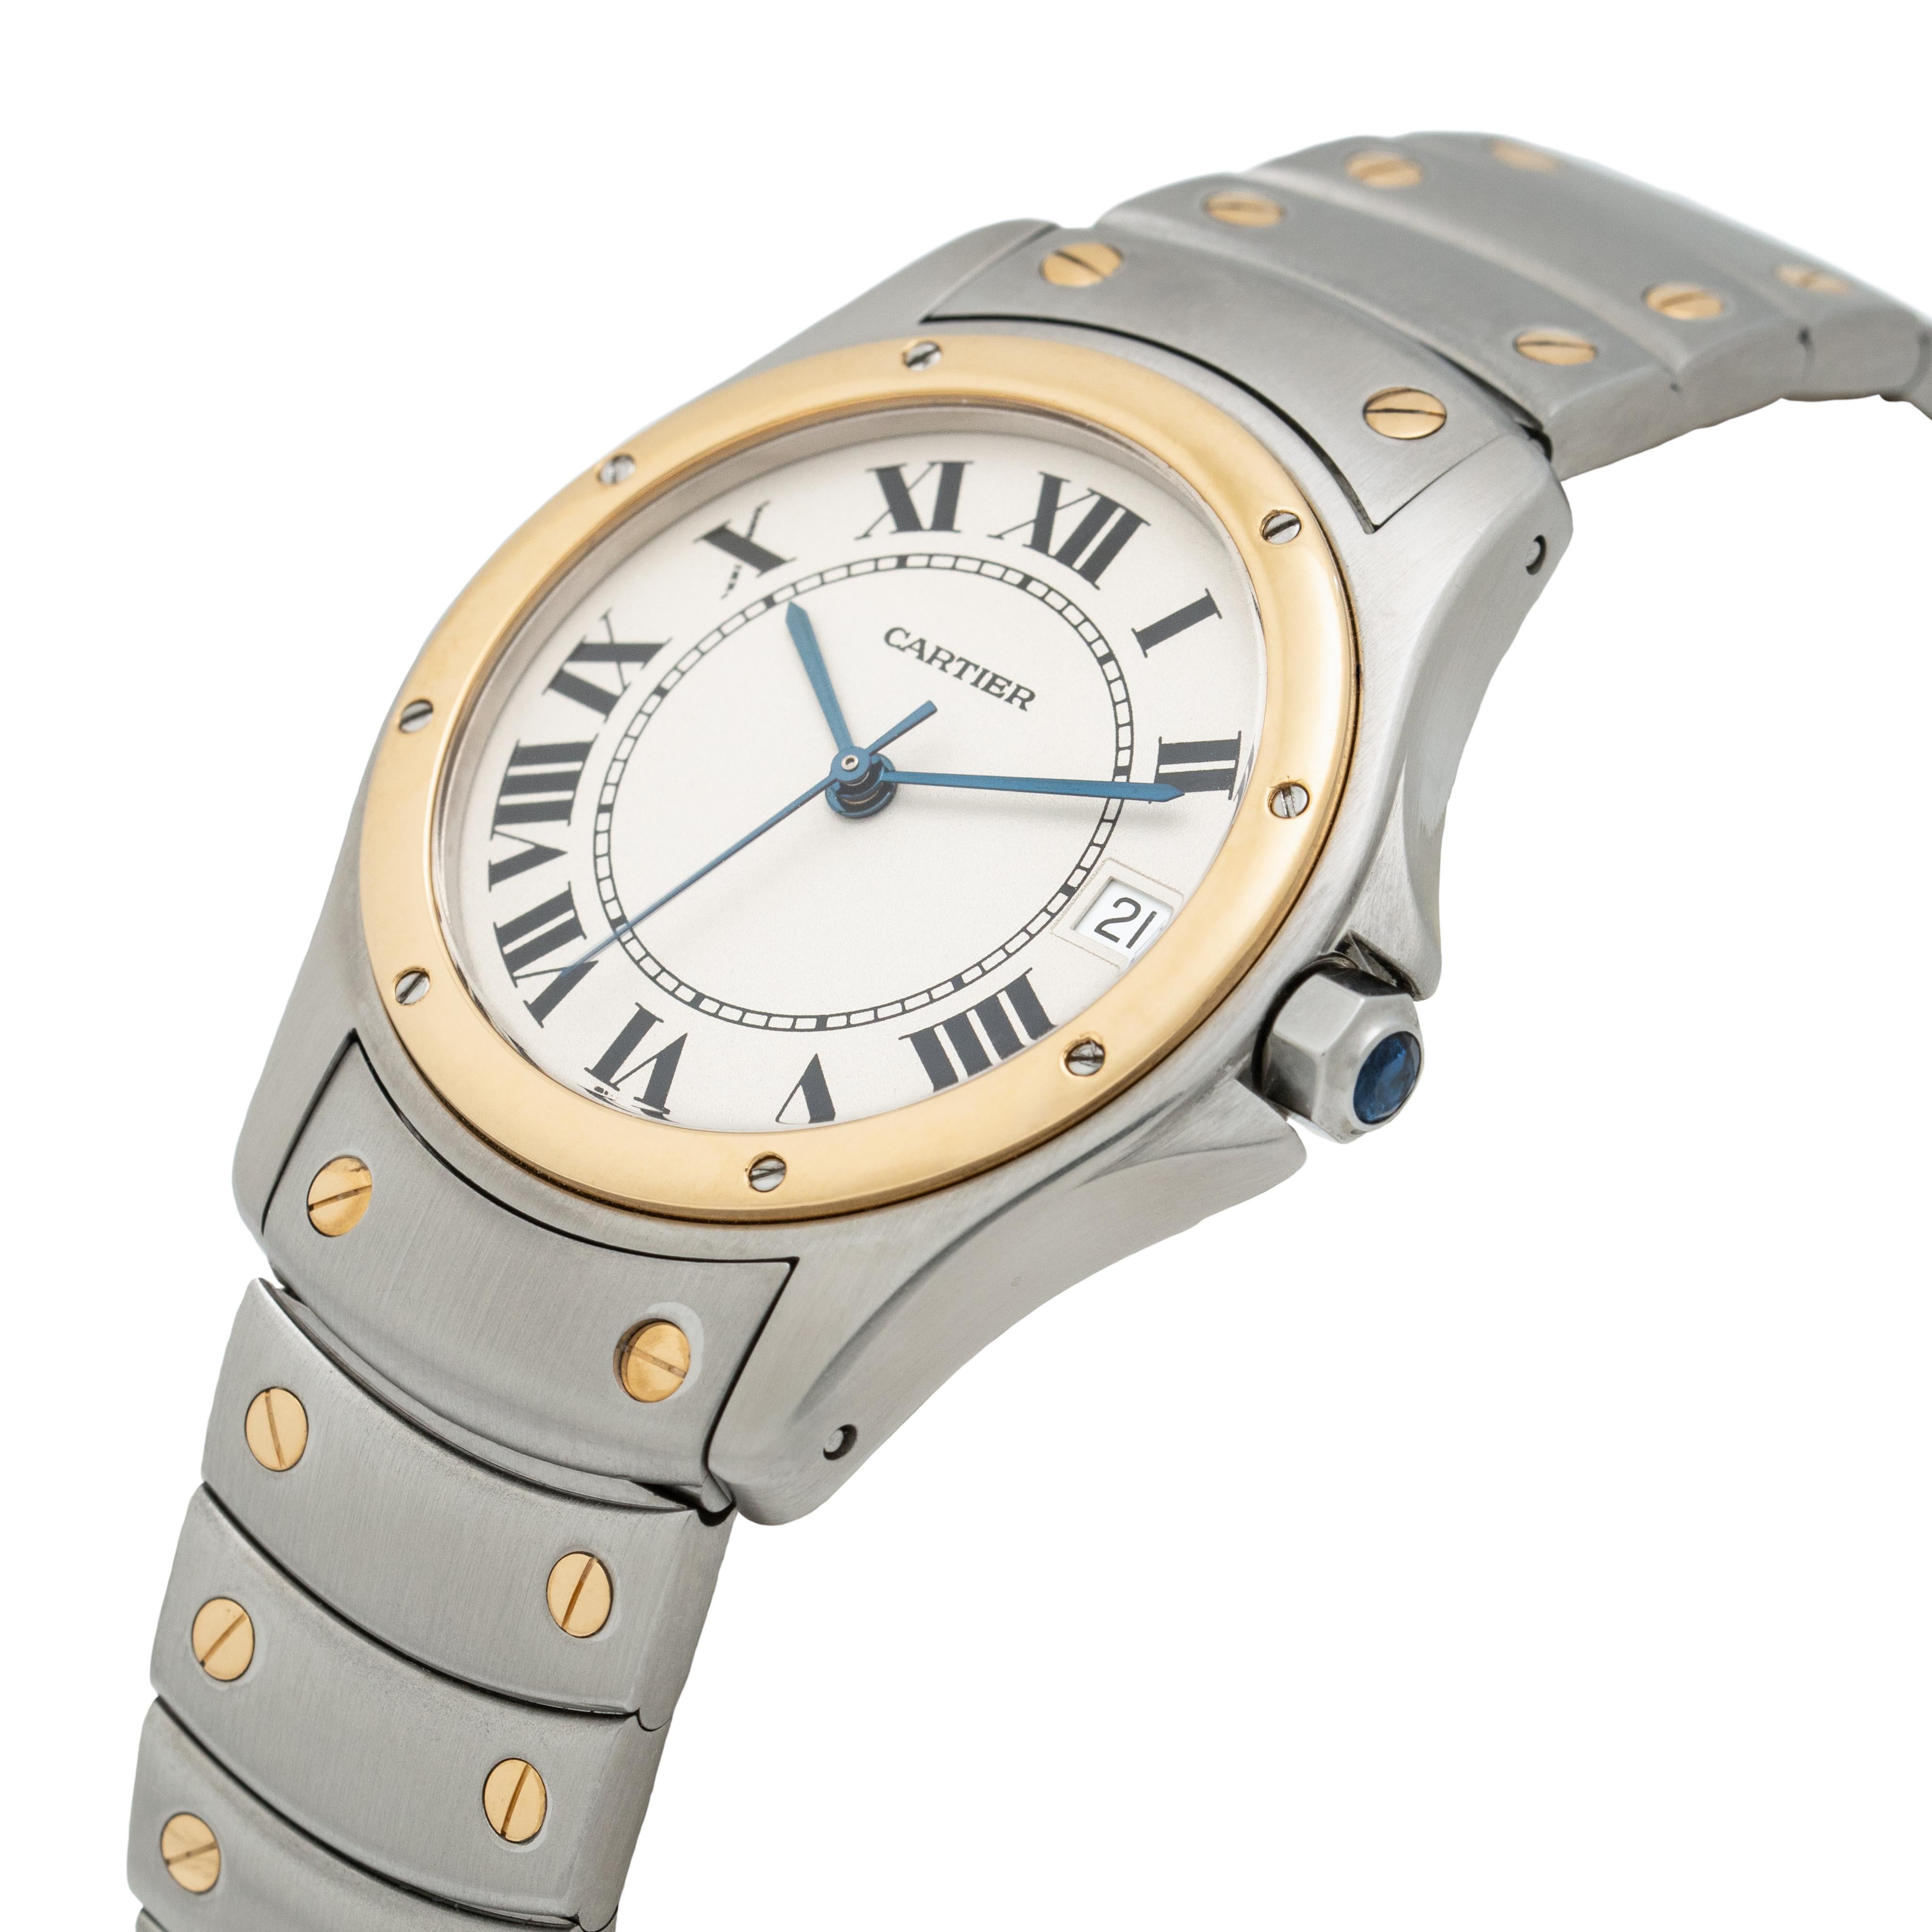 Cartier Santos Ronde 
18k Yellow Gold and Stainless Steel
c.1990s
Model 1910
33mm Dial
Automatic Movement

Stephanie Windsor guarantees the proper functioning of this watch mechanism for ONE year from the purchase date. Our watches are guaranteed to